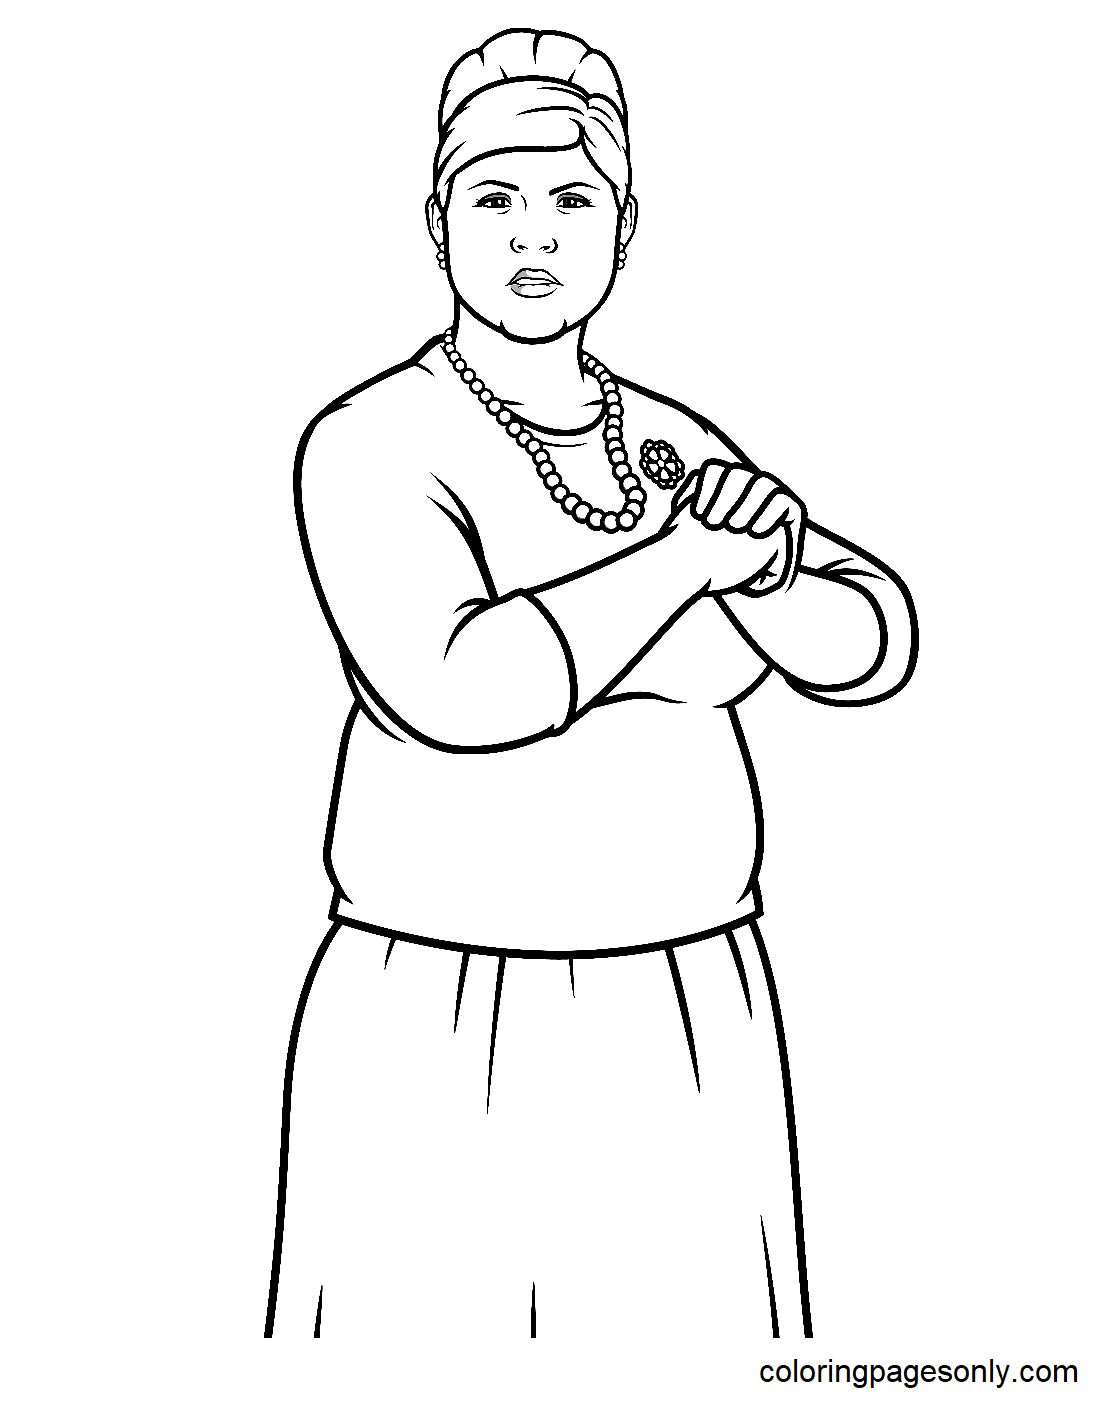 Pam Poovey Coloring Pages